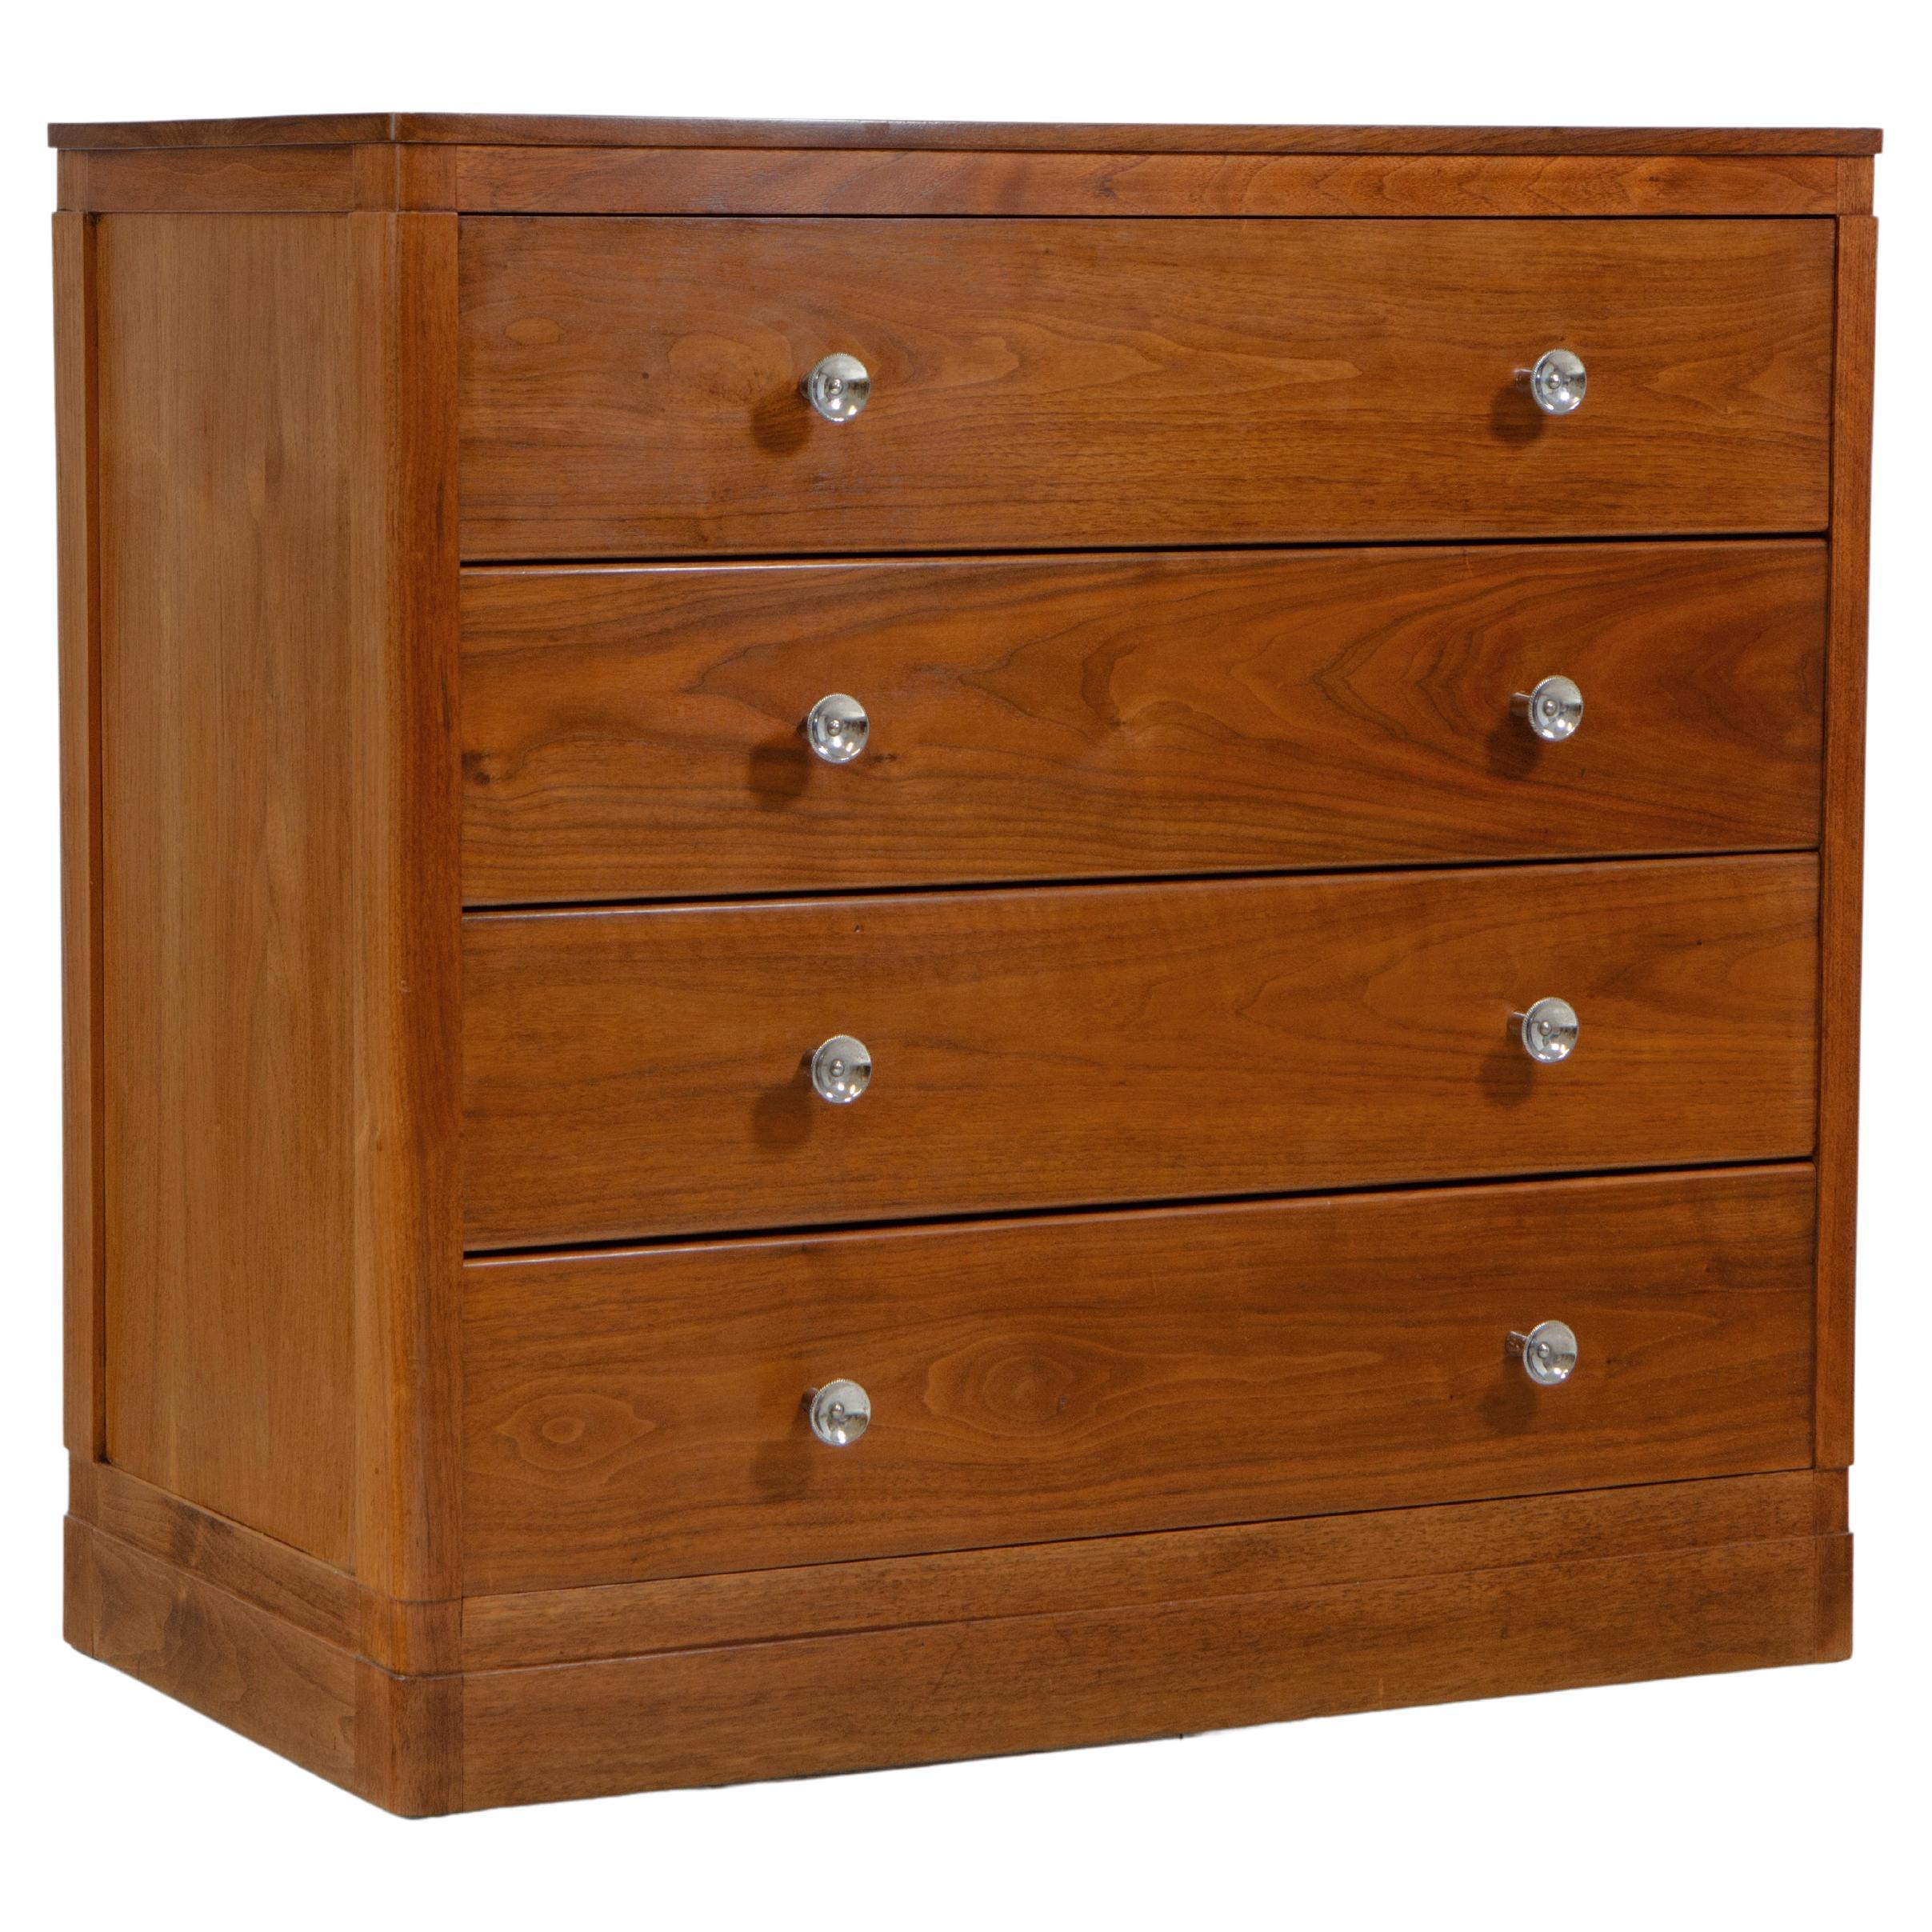 1930’s Cotswold Walnut Chest Drawers Designed By WH Russell For Gordon Russell